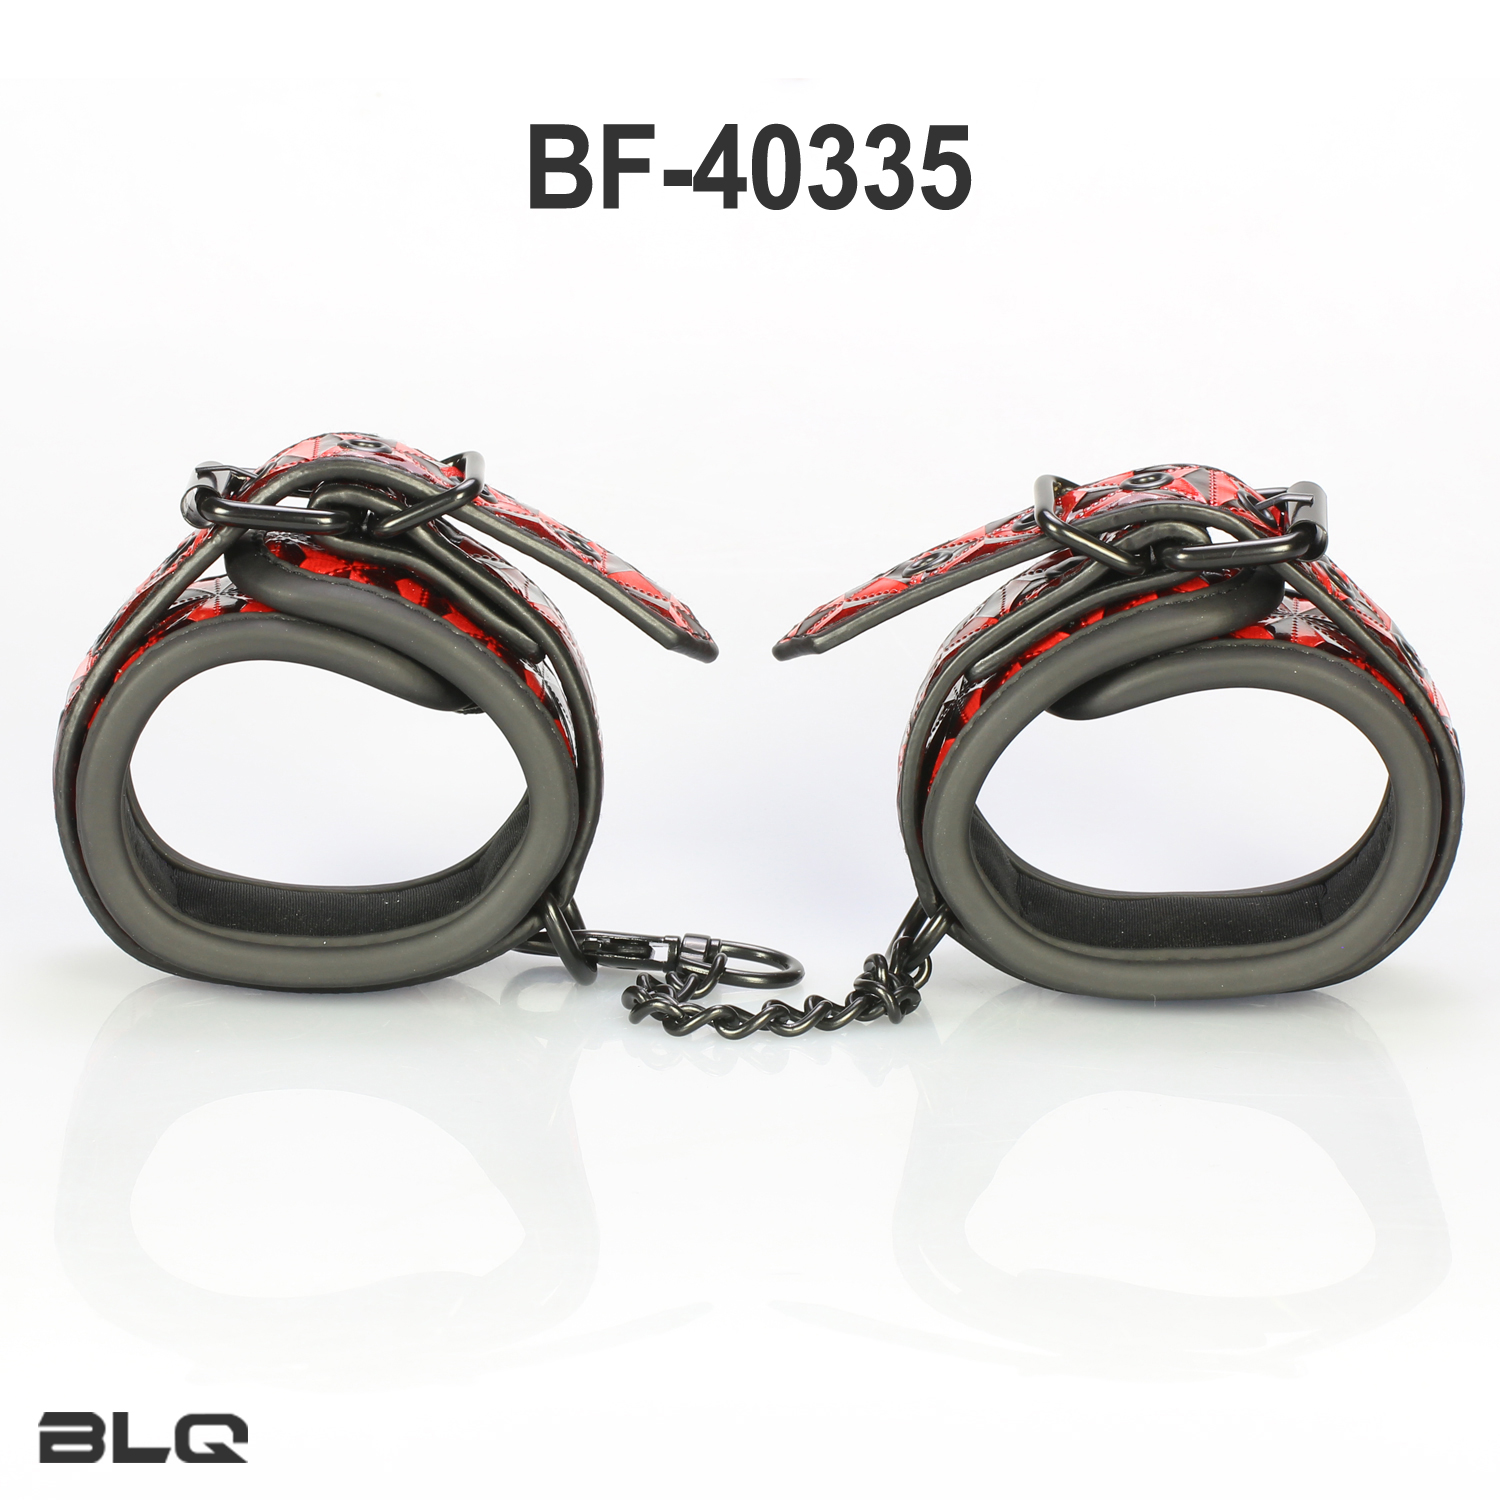  Luxury Ankle Cuffs for Adult Bondage Restraints Sex Play